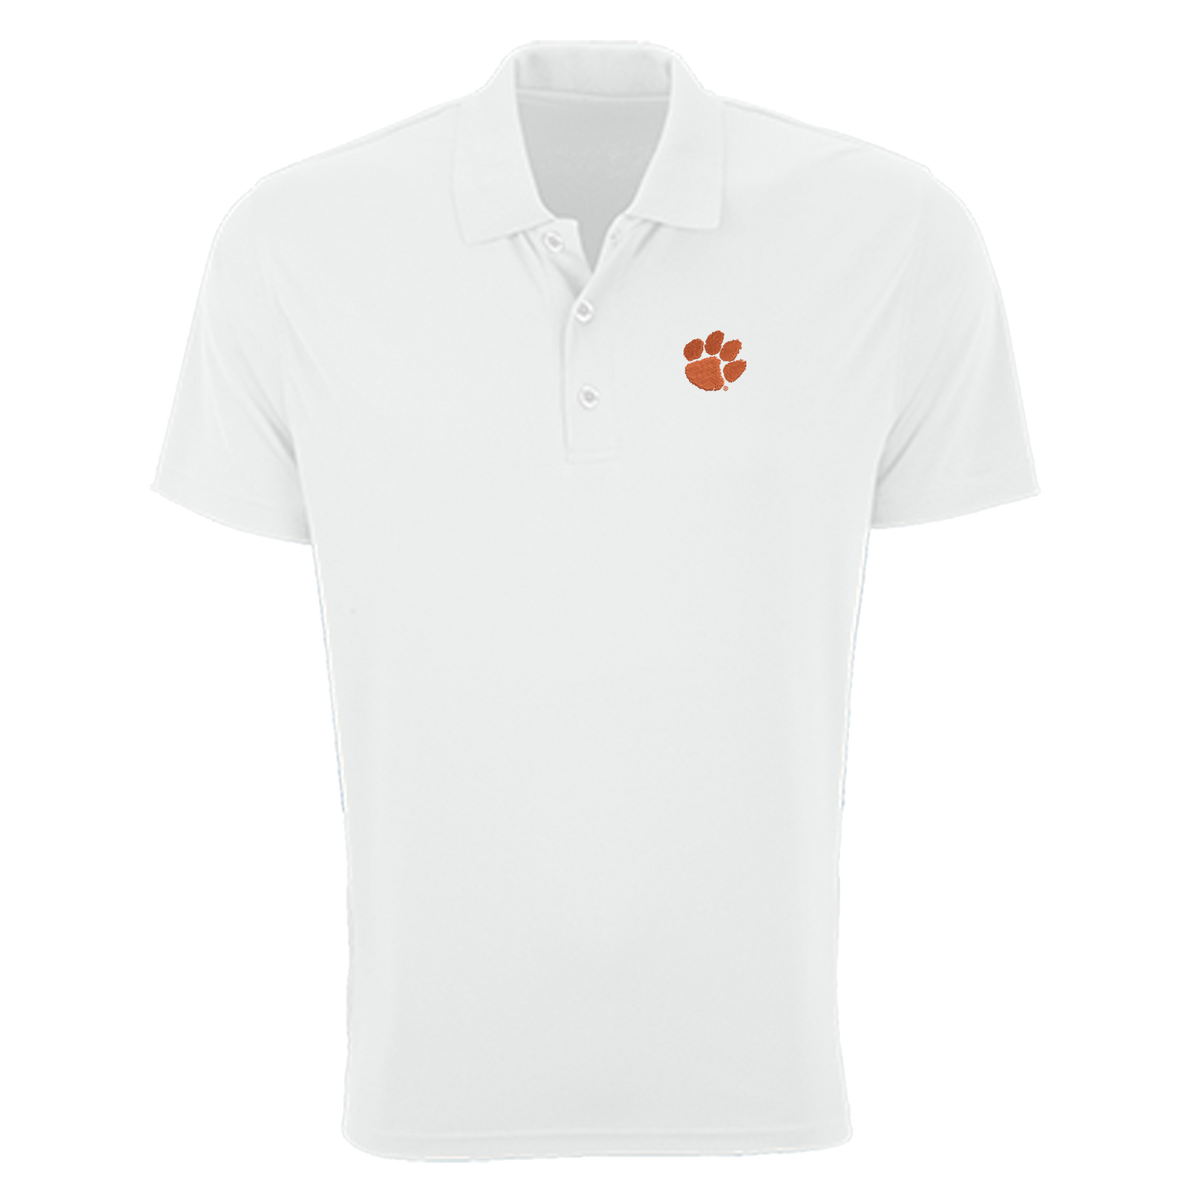 Clemson Vansport Omega Solid Mesh Tech Polo with Paw